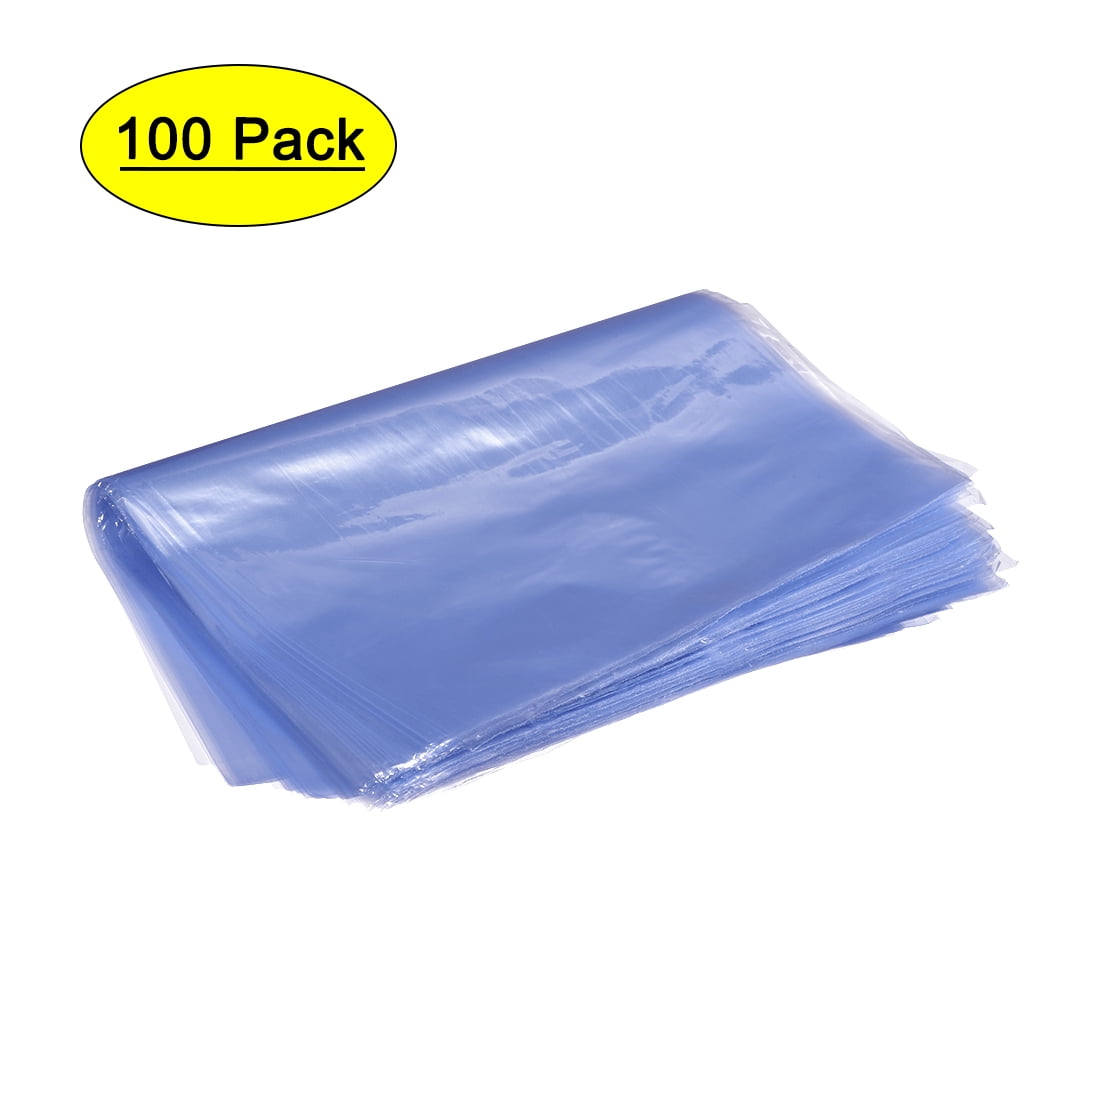 PVC Heat Shrink Wrap Bags Clear 100 Pack 100 Guage 12x16 inch Odorless 